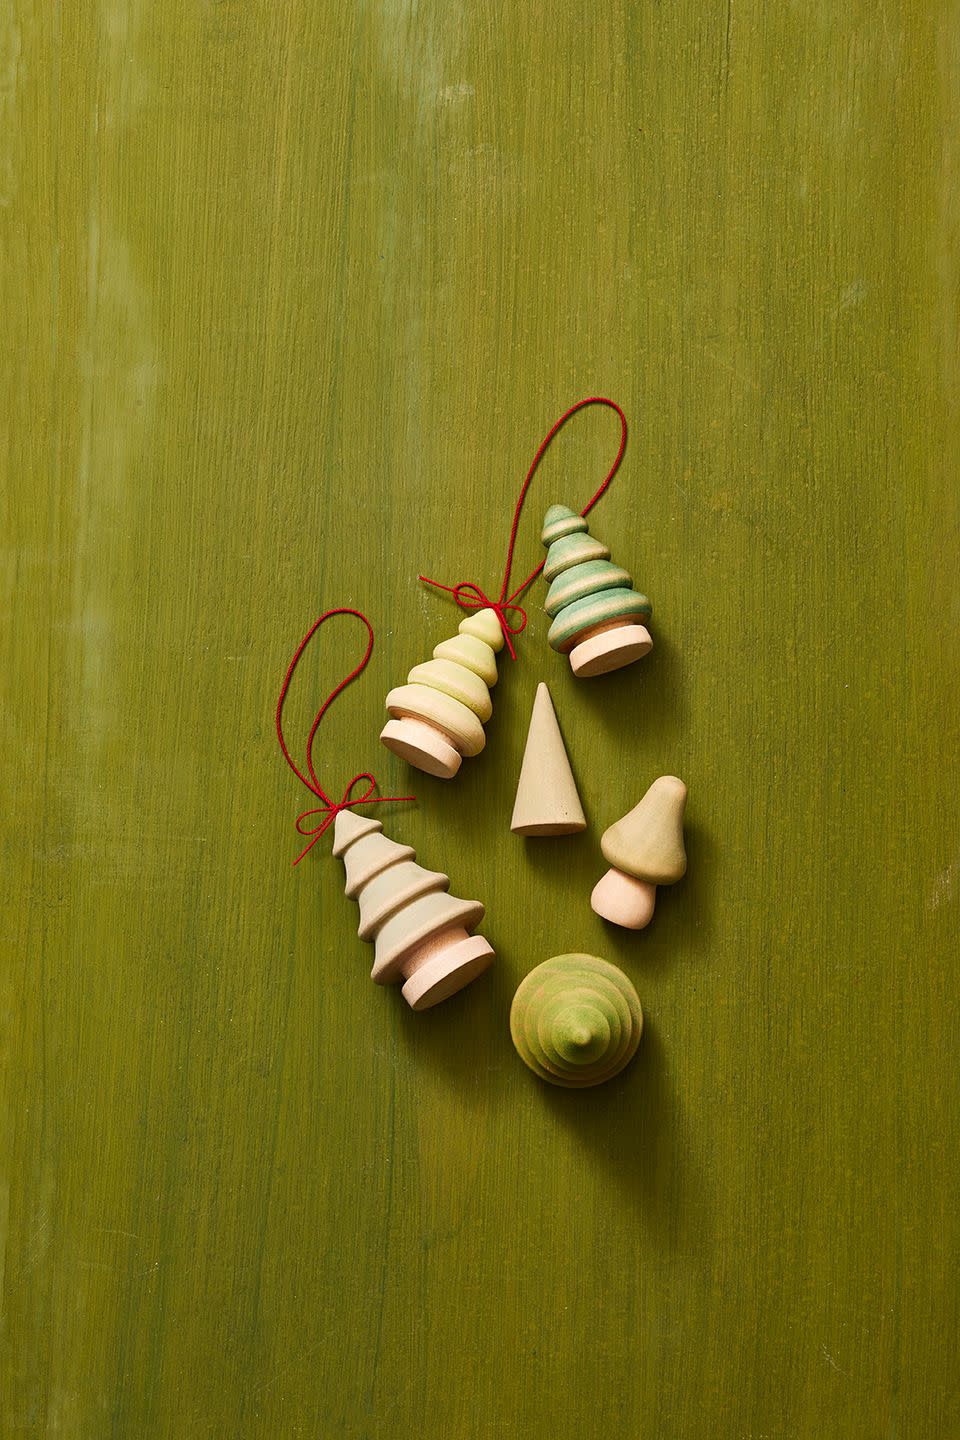 Make Stained Wooden Tree Ornaments